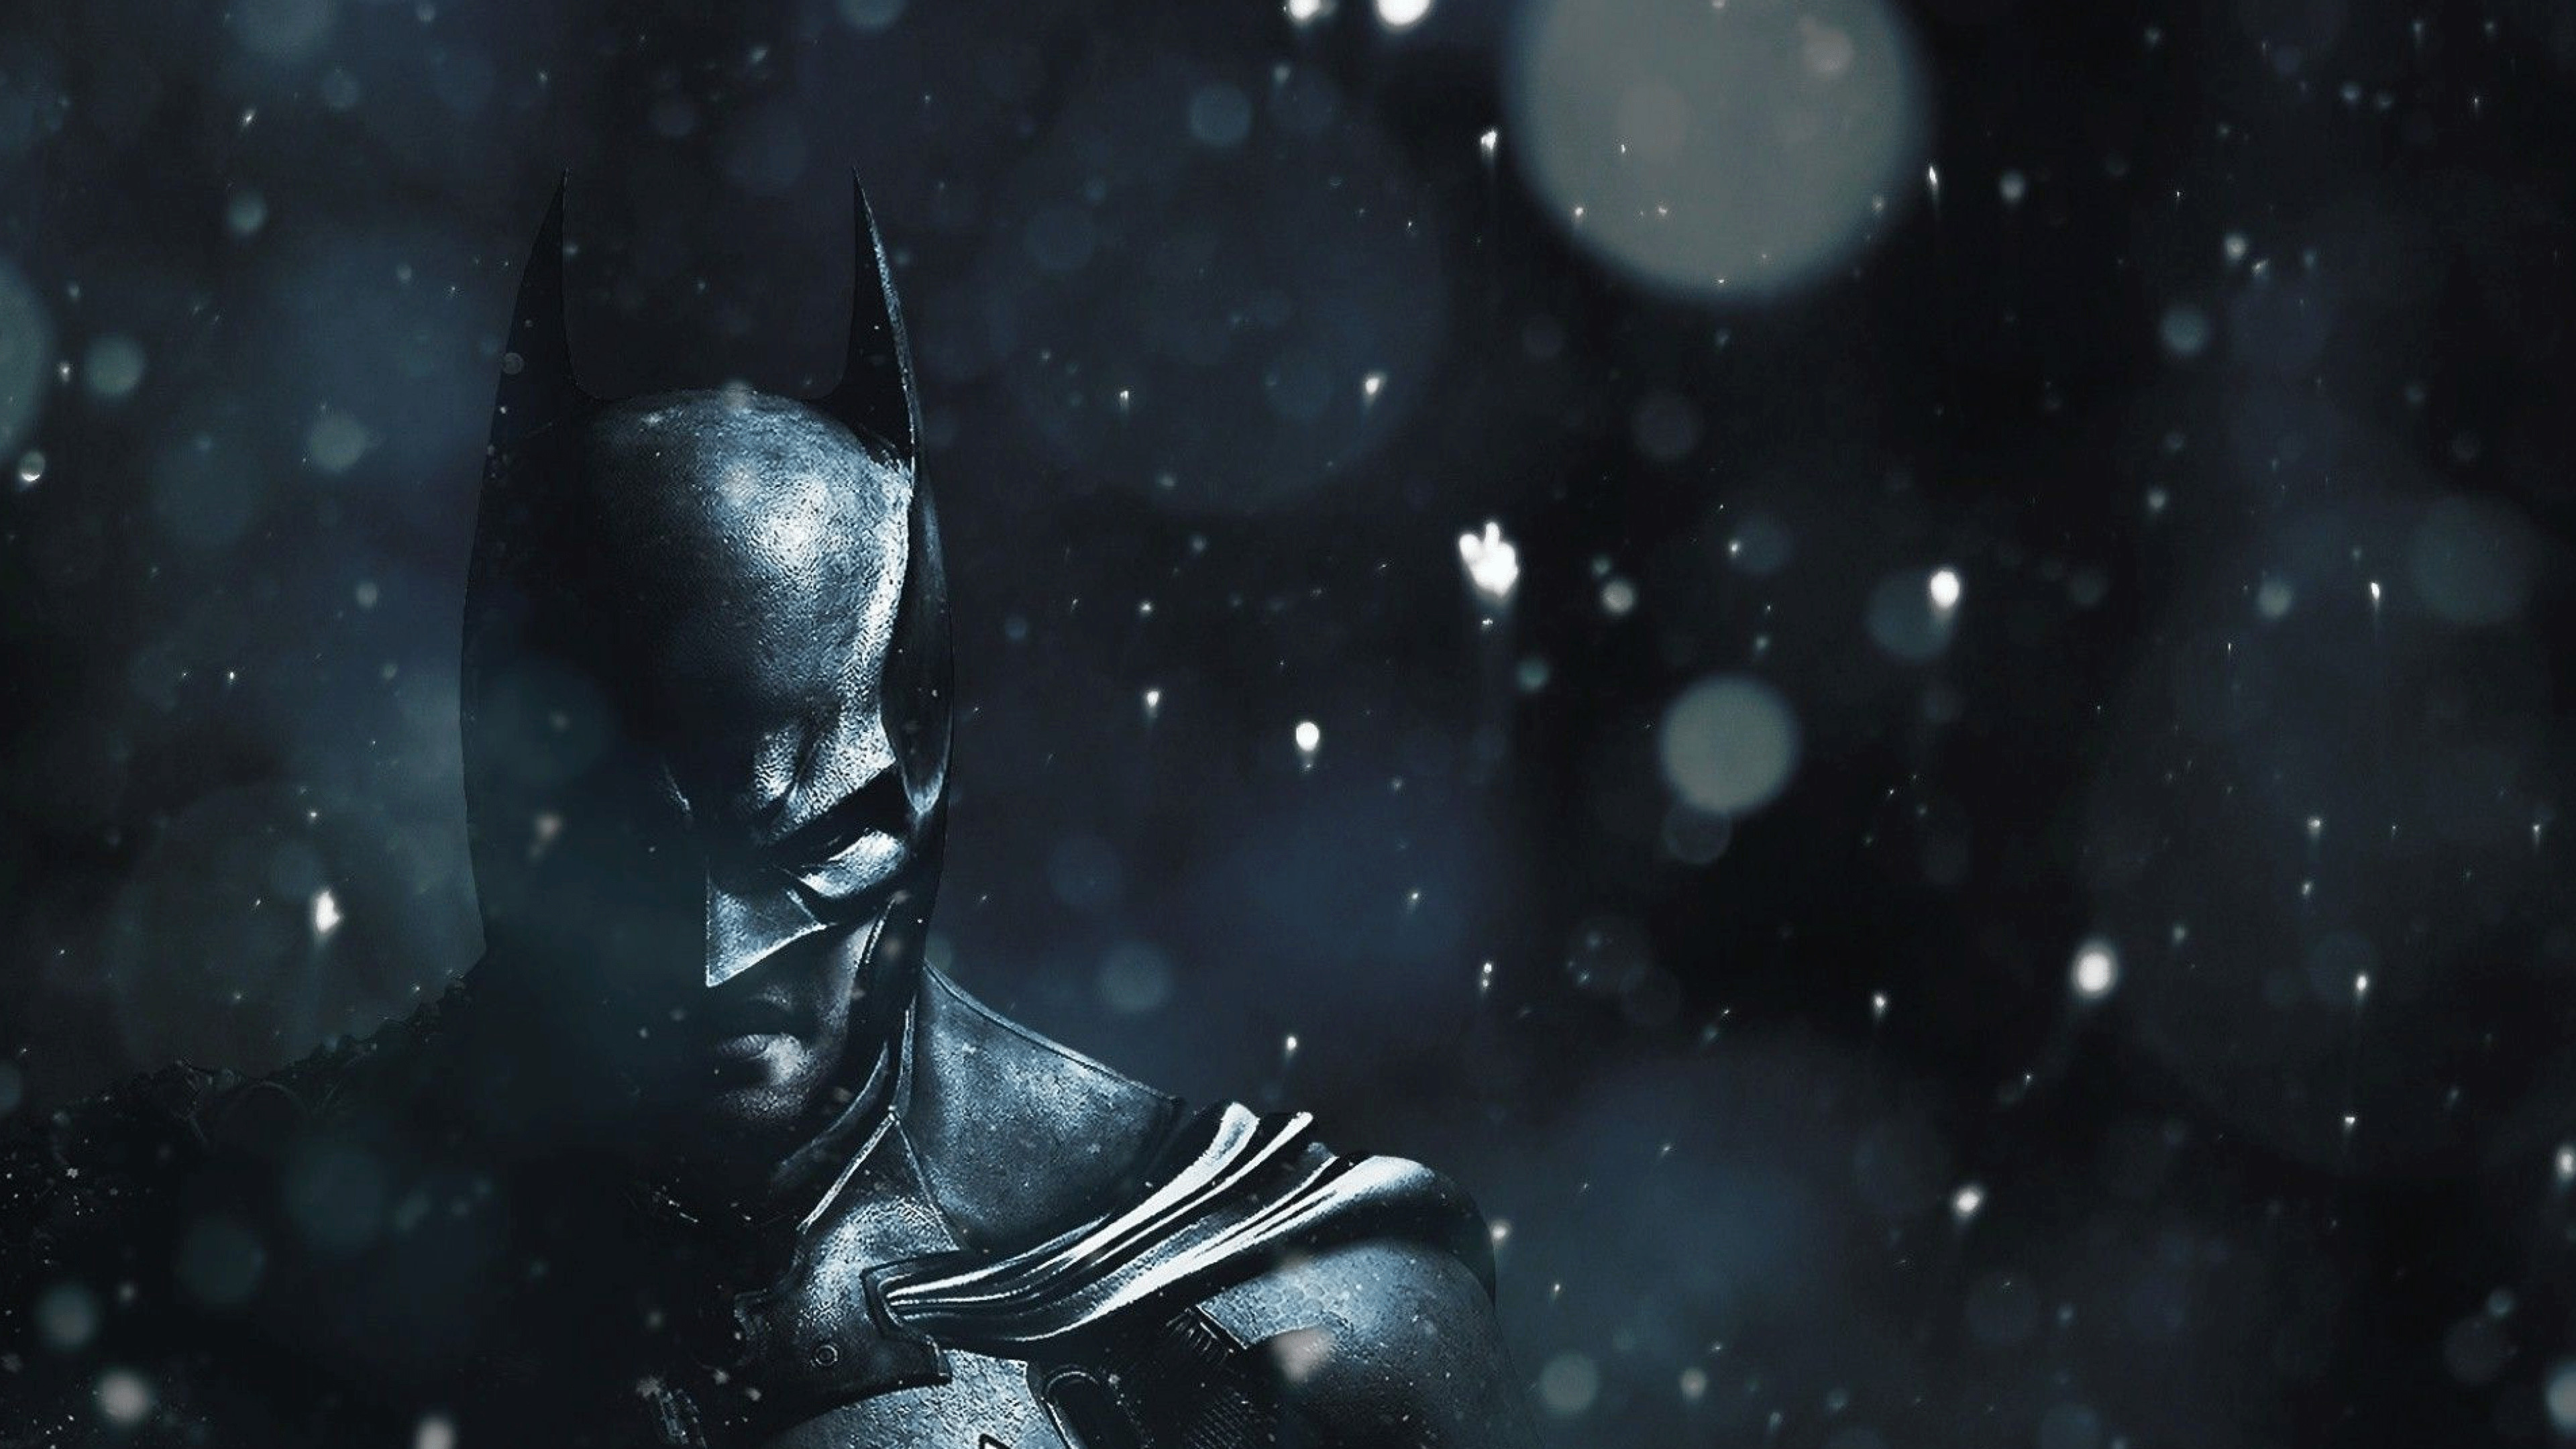 Collection of Batman Pc Wallpapers on HDWallpapers Batman Wallpapers  Wallpapers)